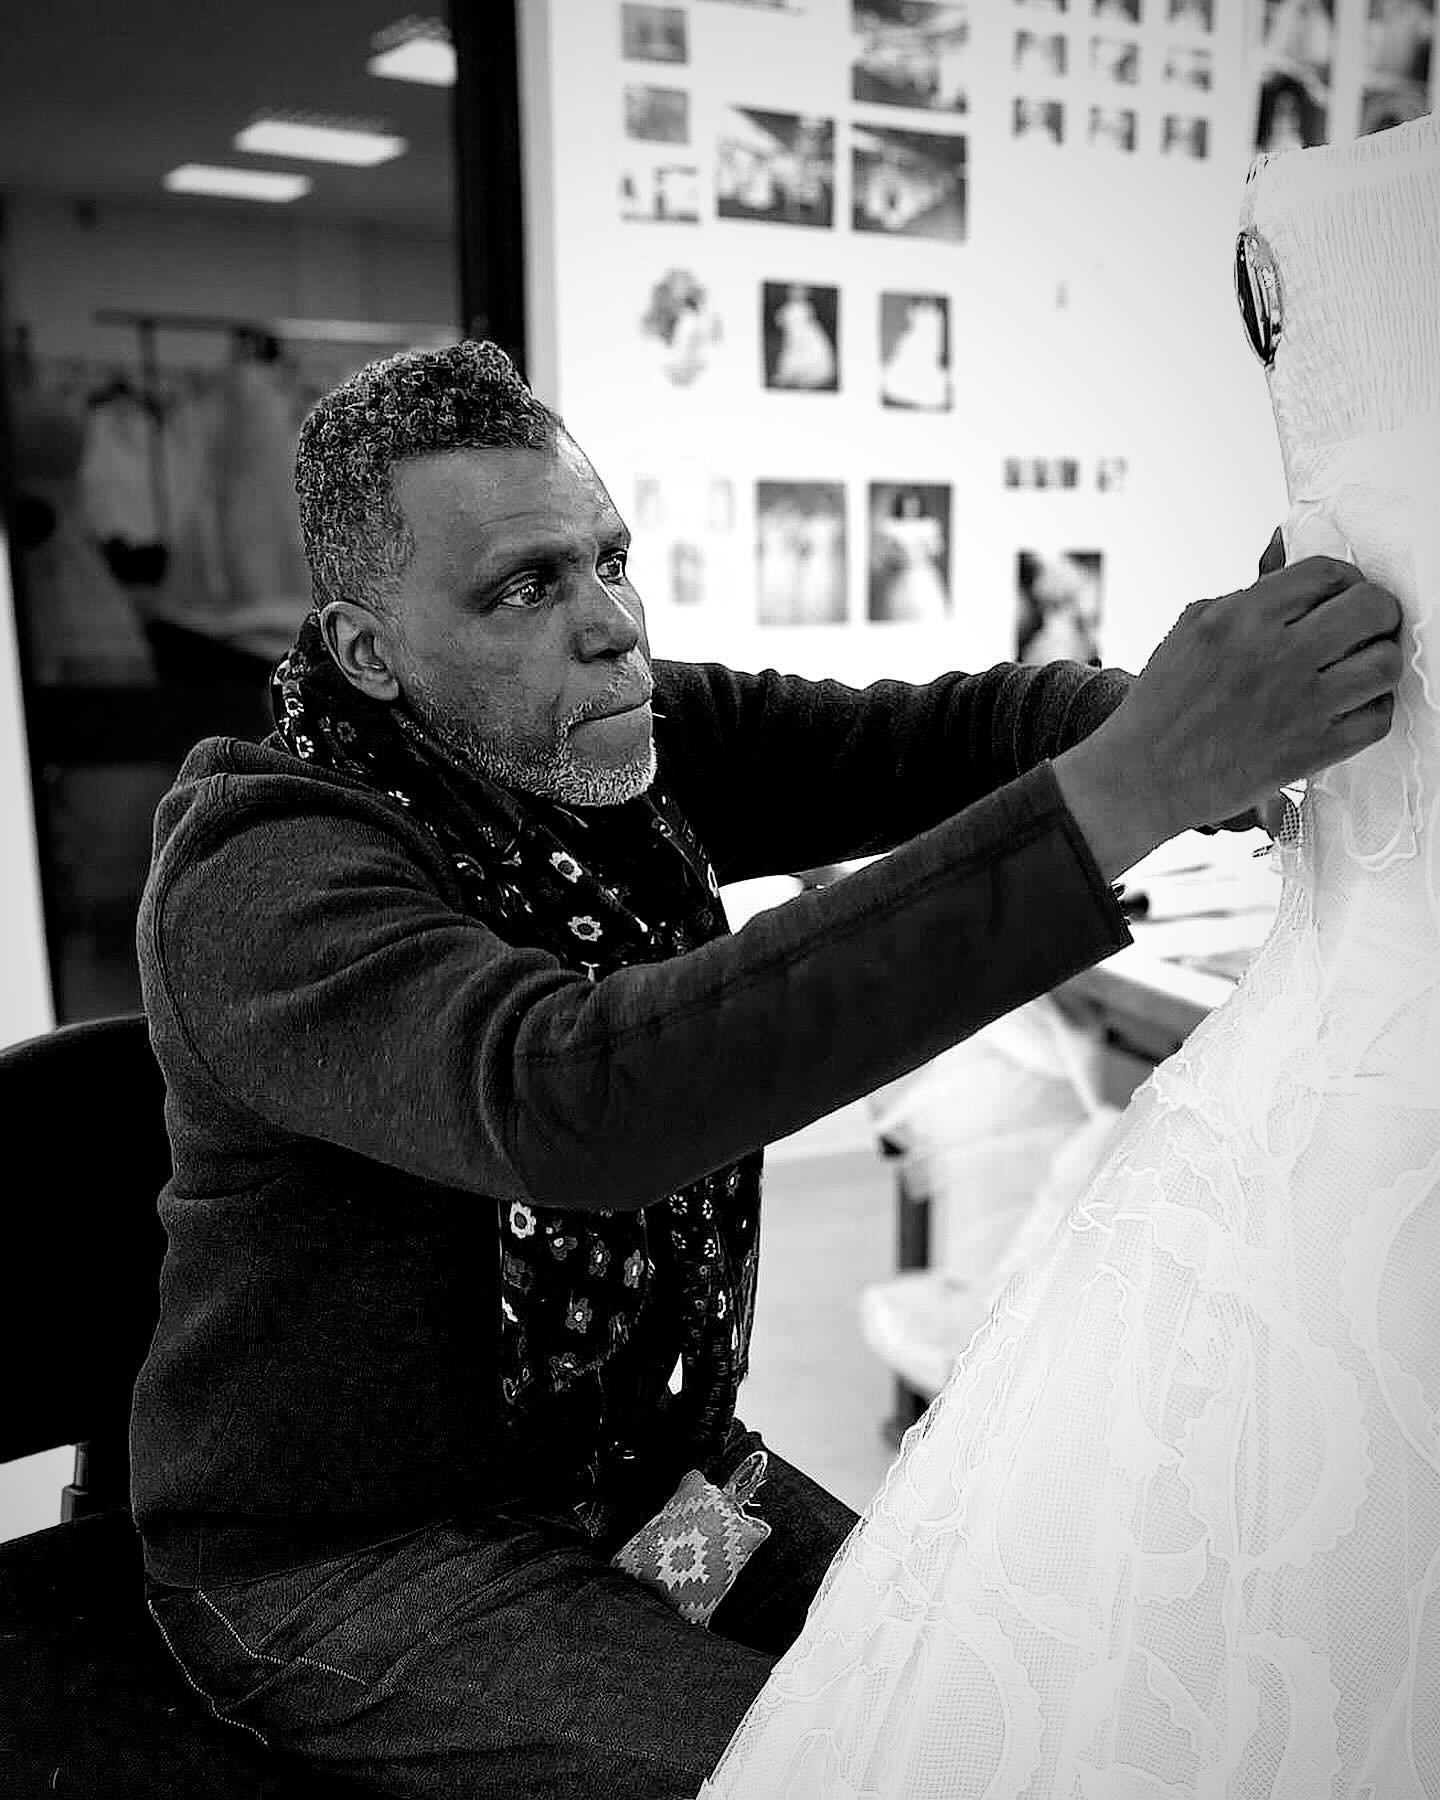 A moment to reflect on his new Spring 2025 Collection, @mark_a_ingram shares: 

&ldquo;Building a collection from concept to runway is a labor of love&hellip;one that I relish and become fully immersed in. Thank you to all those that help me daily to